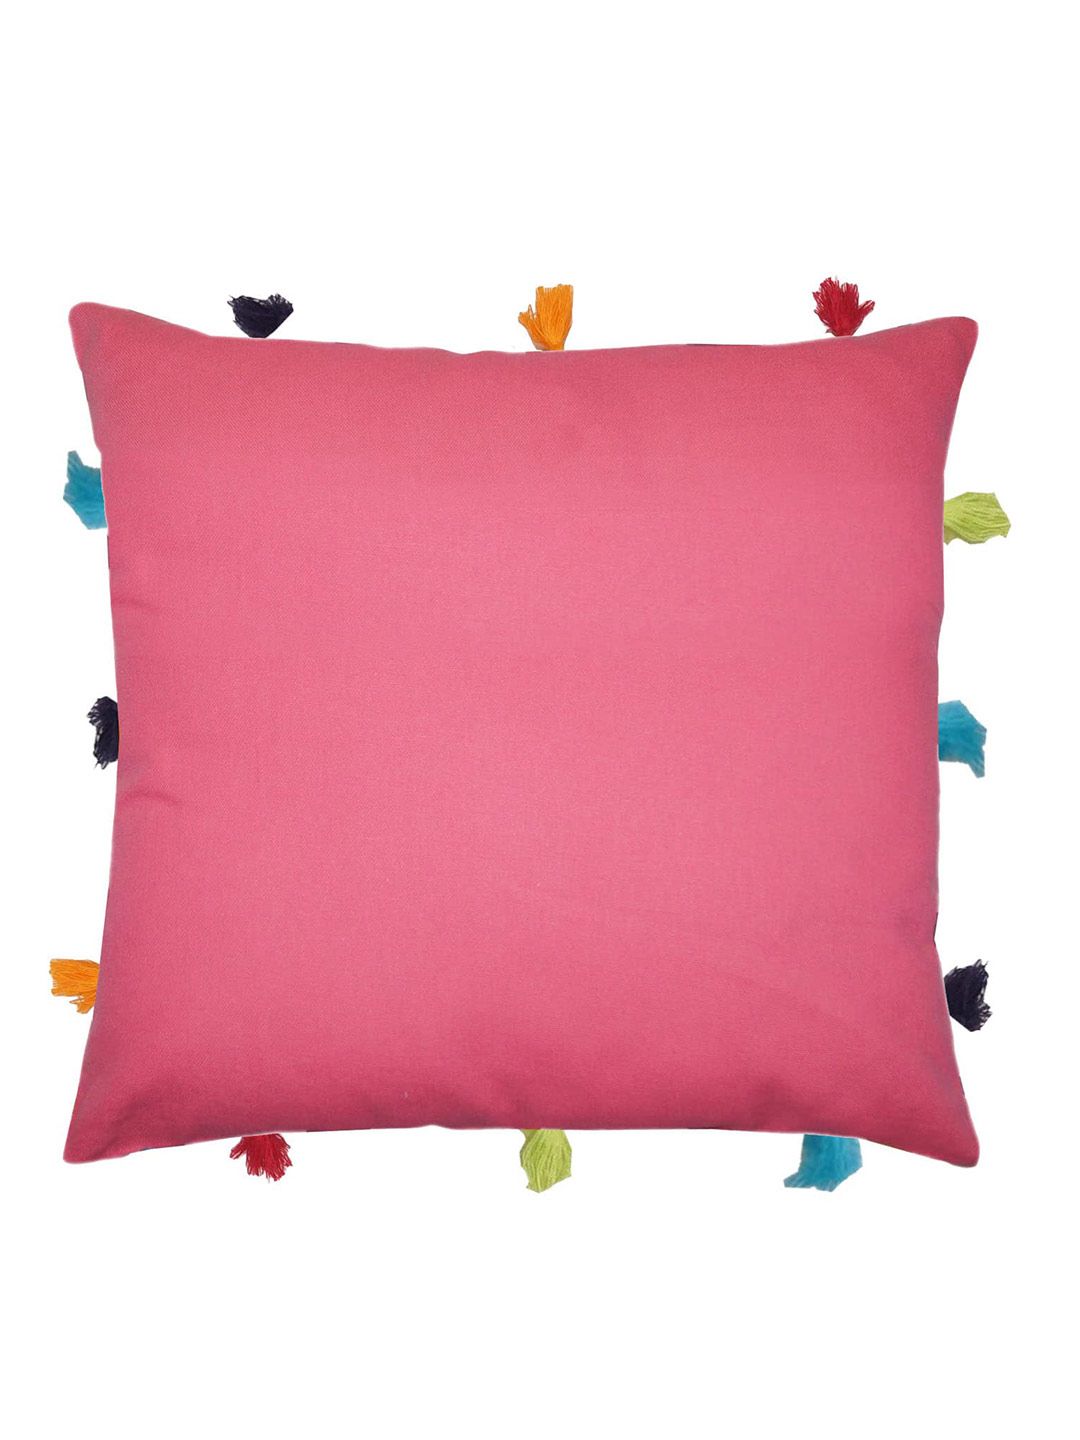 Lushomes Pink Cotton Square Cushion Covers With Colorful Tassels Price in India